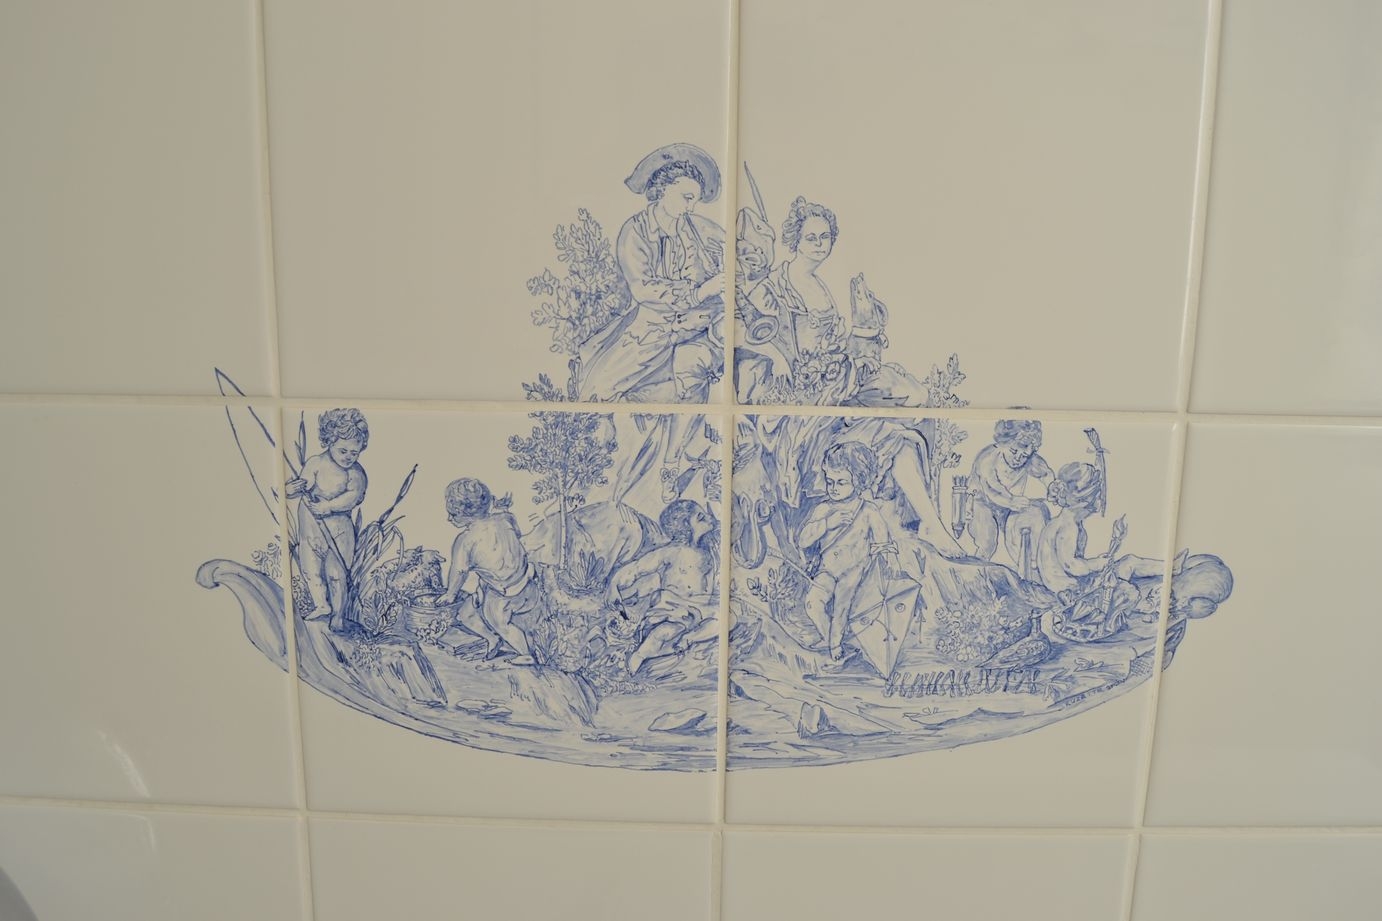 Image of the tiles on the wall of the bathroom of the magnolia room of the Chateau de la Saluliniere